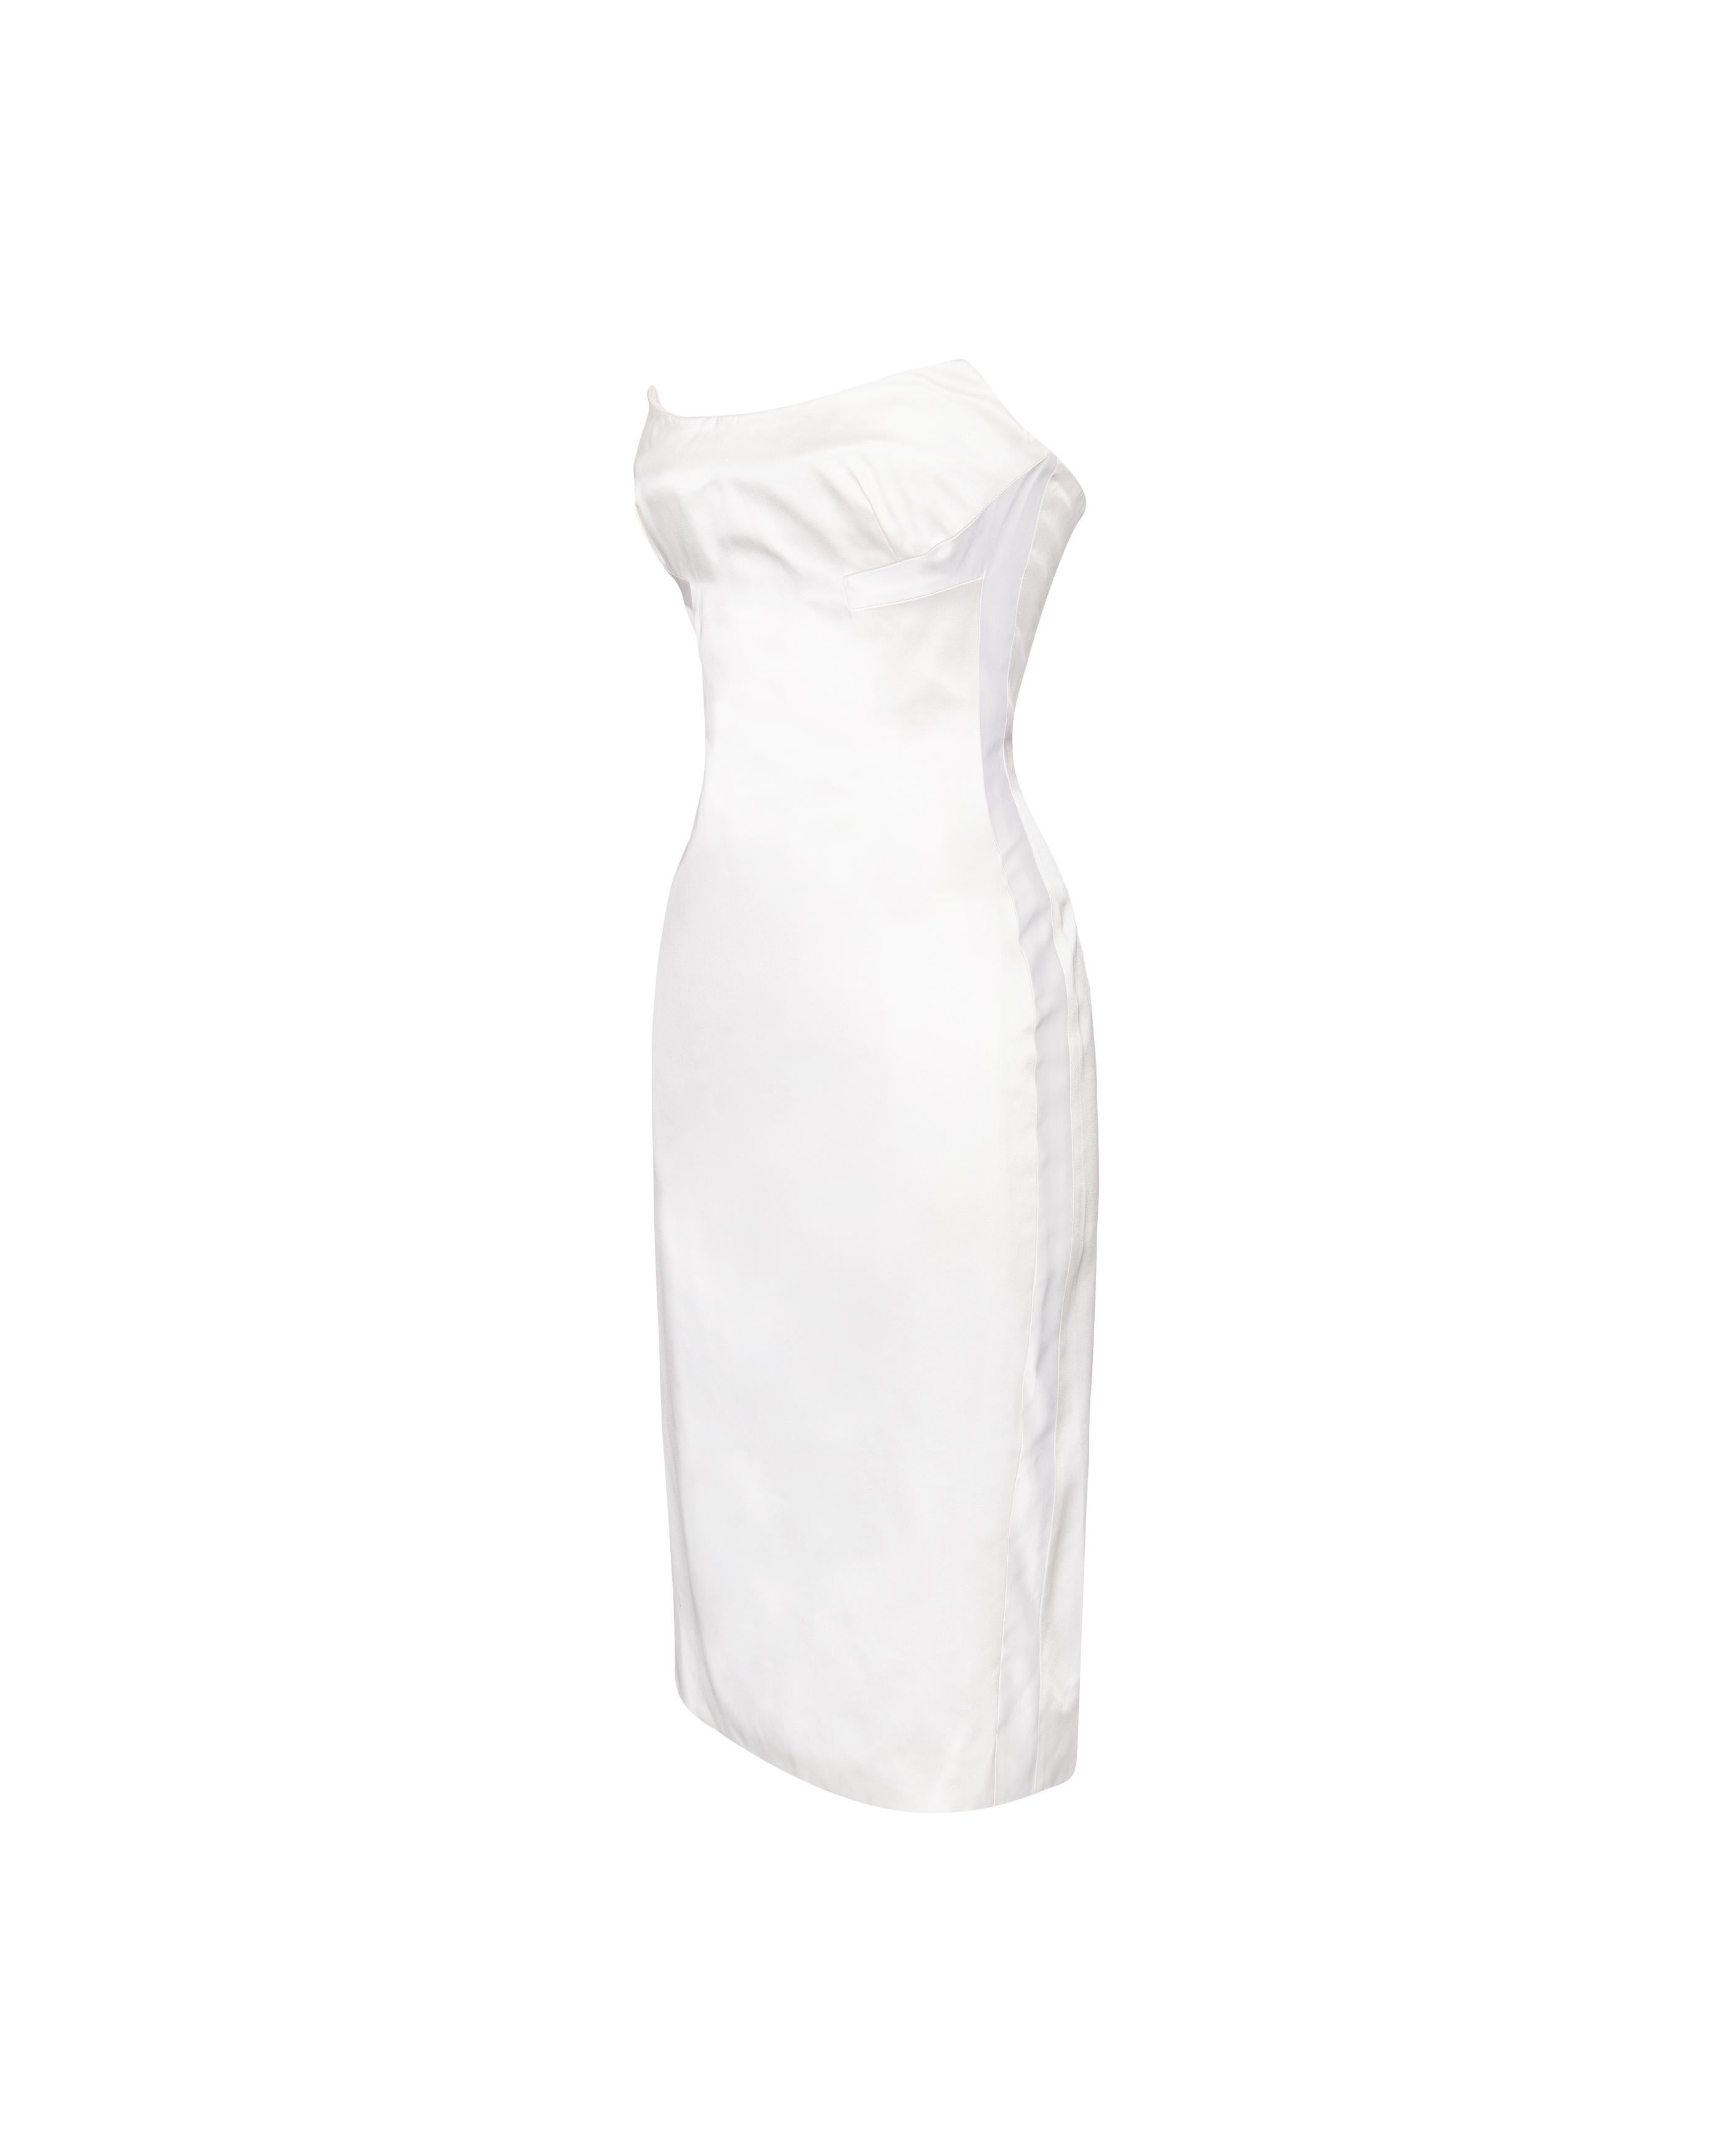 S/S 2001 Gucci by Tom Ford White Silk Satin Strapless Corset Dress In Excellent Condition In North Hollywood, CA